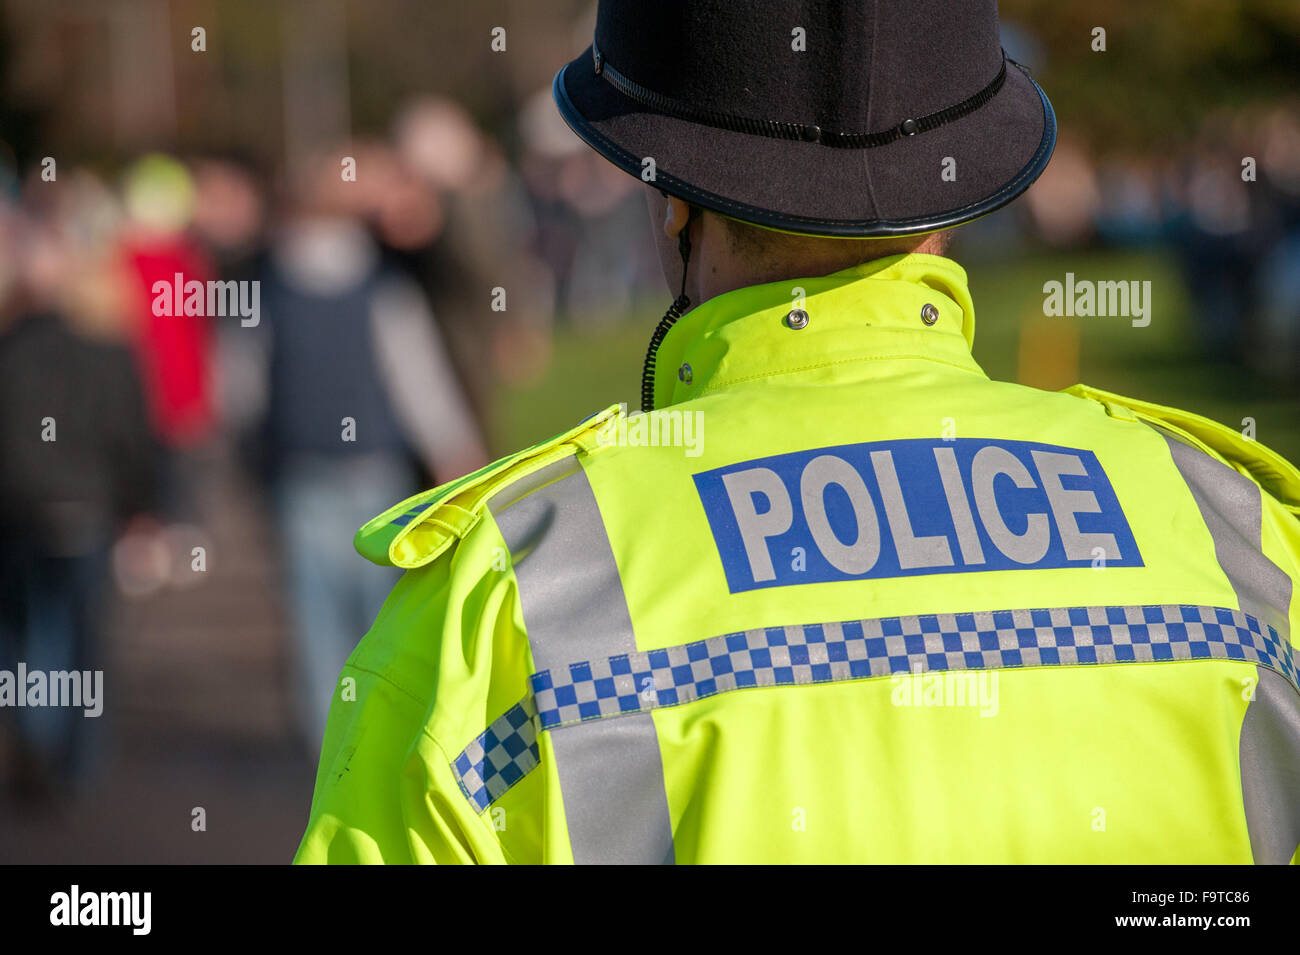 British police officer uniform with high visible yellow jacket Stock Photo